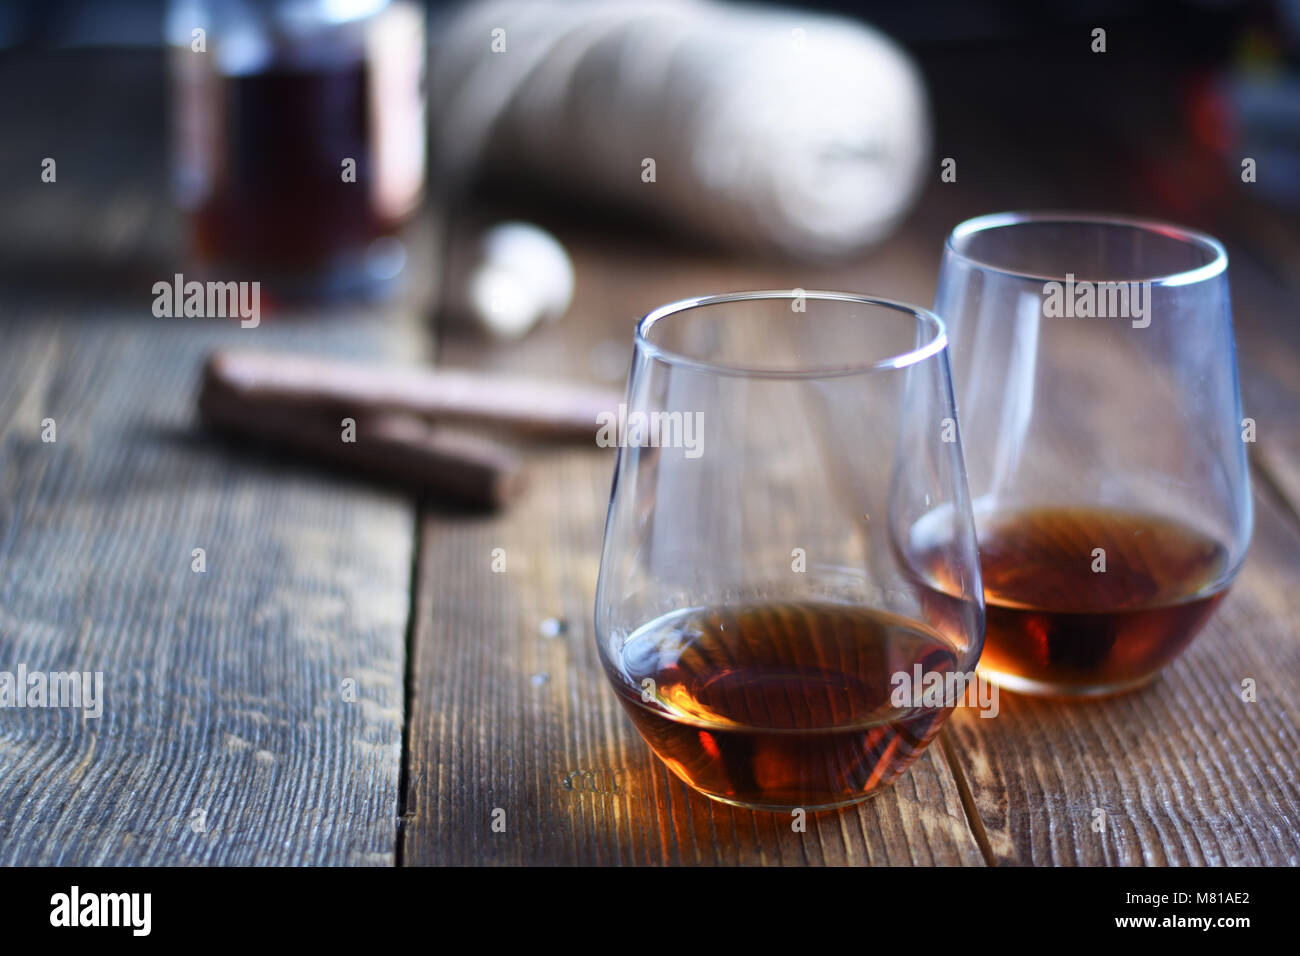 Vintage tools of Glass of rum on a rustic wooden table with cigars and bottle.barber shop on wooden background Stock Photo